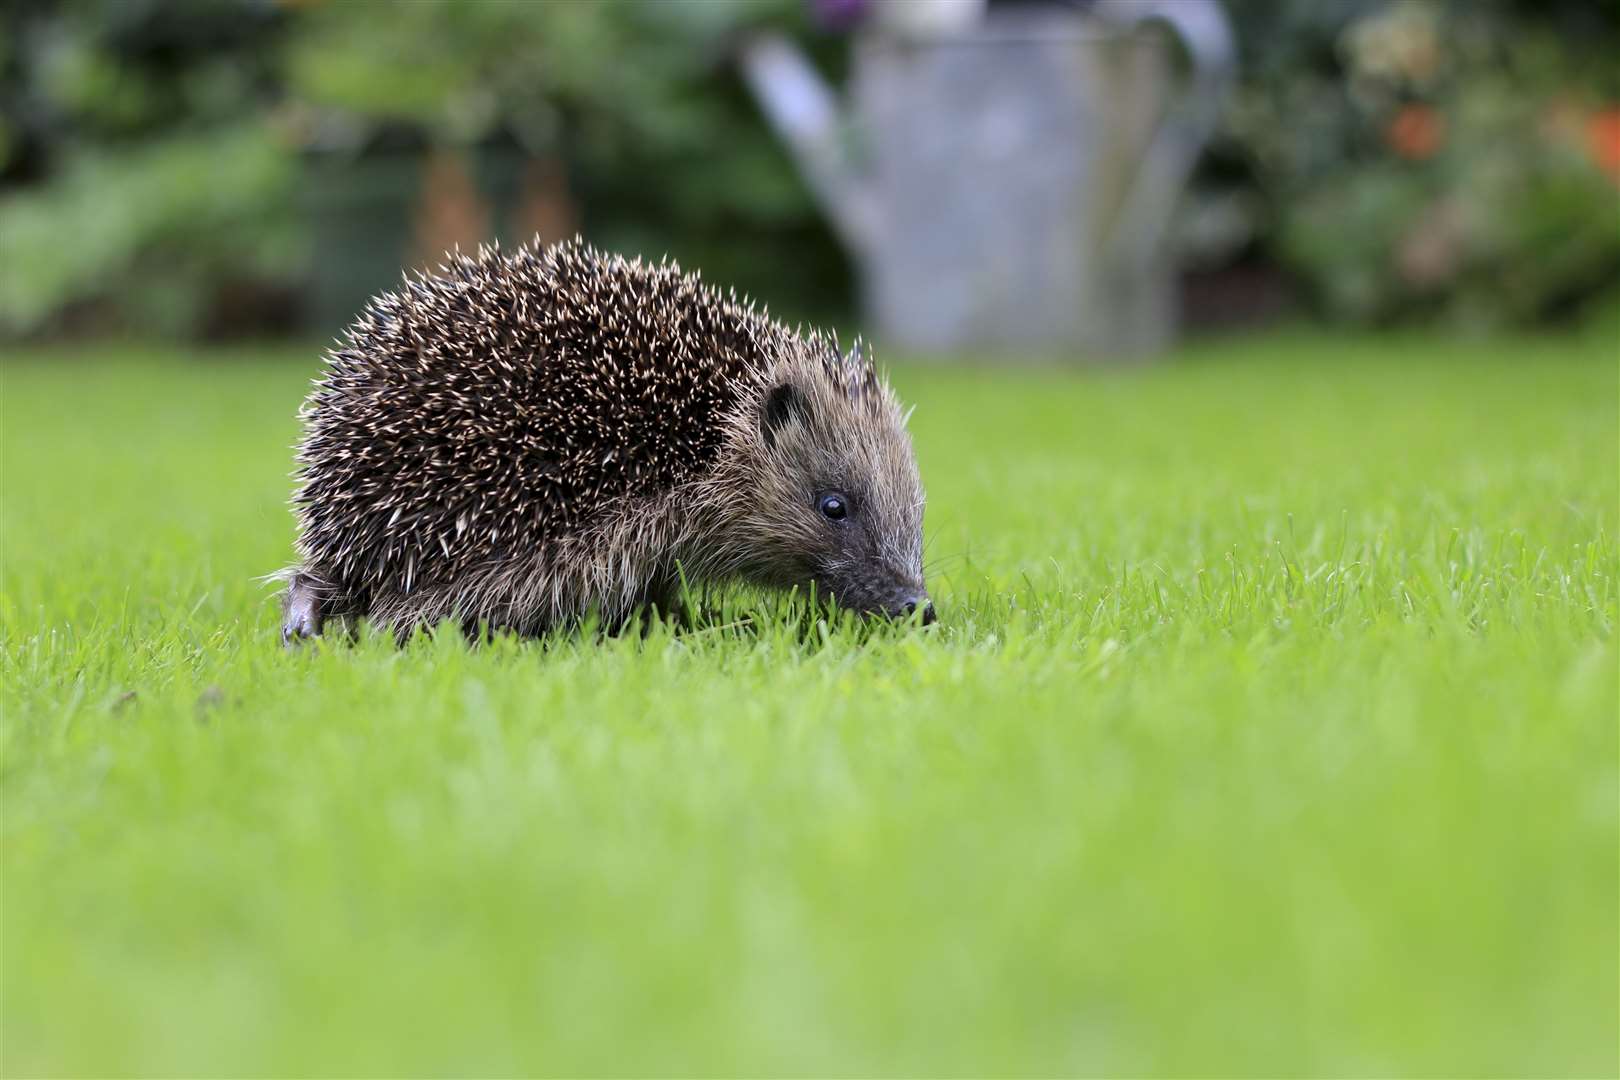 The RSPCA received more than 6,000 calls about sick, injured and orphaned hedgehogs. Photo: Tom Marshal